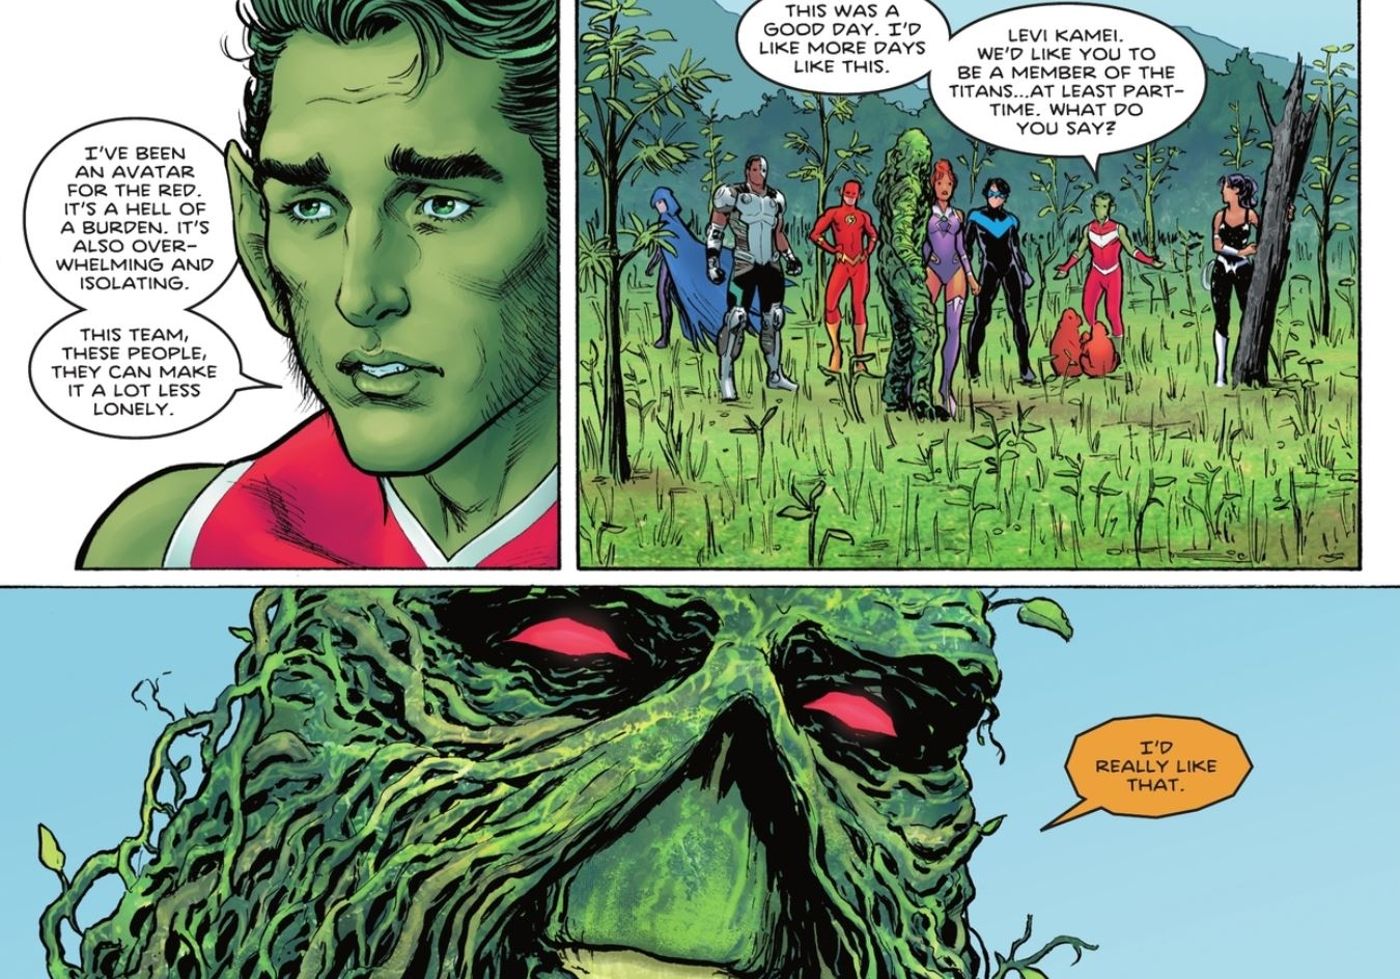 Swamp Thing Joins the Titans DC